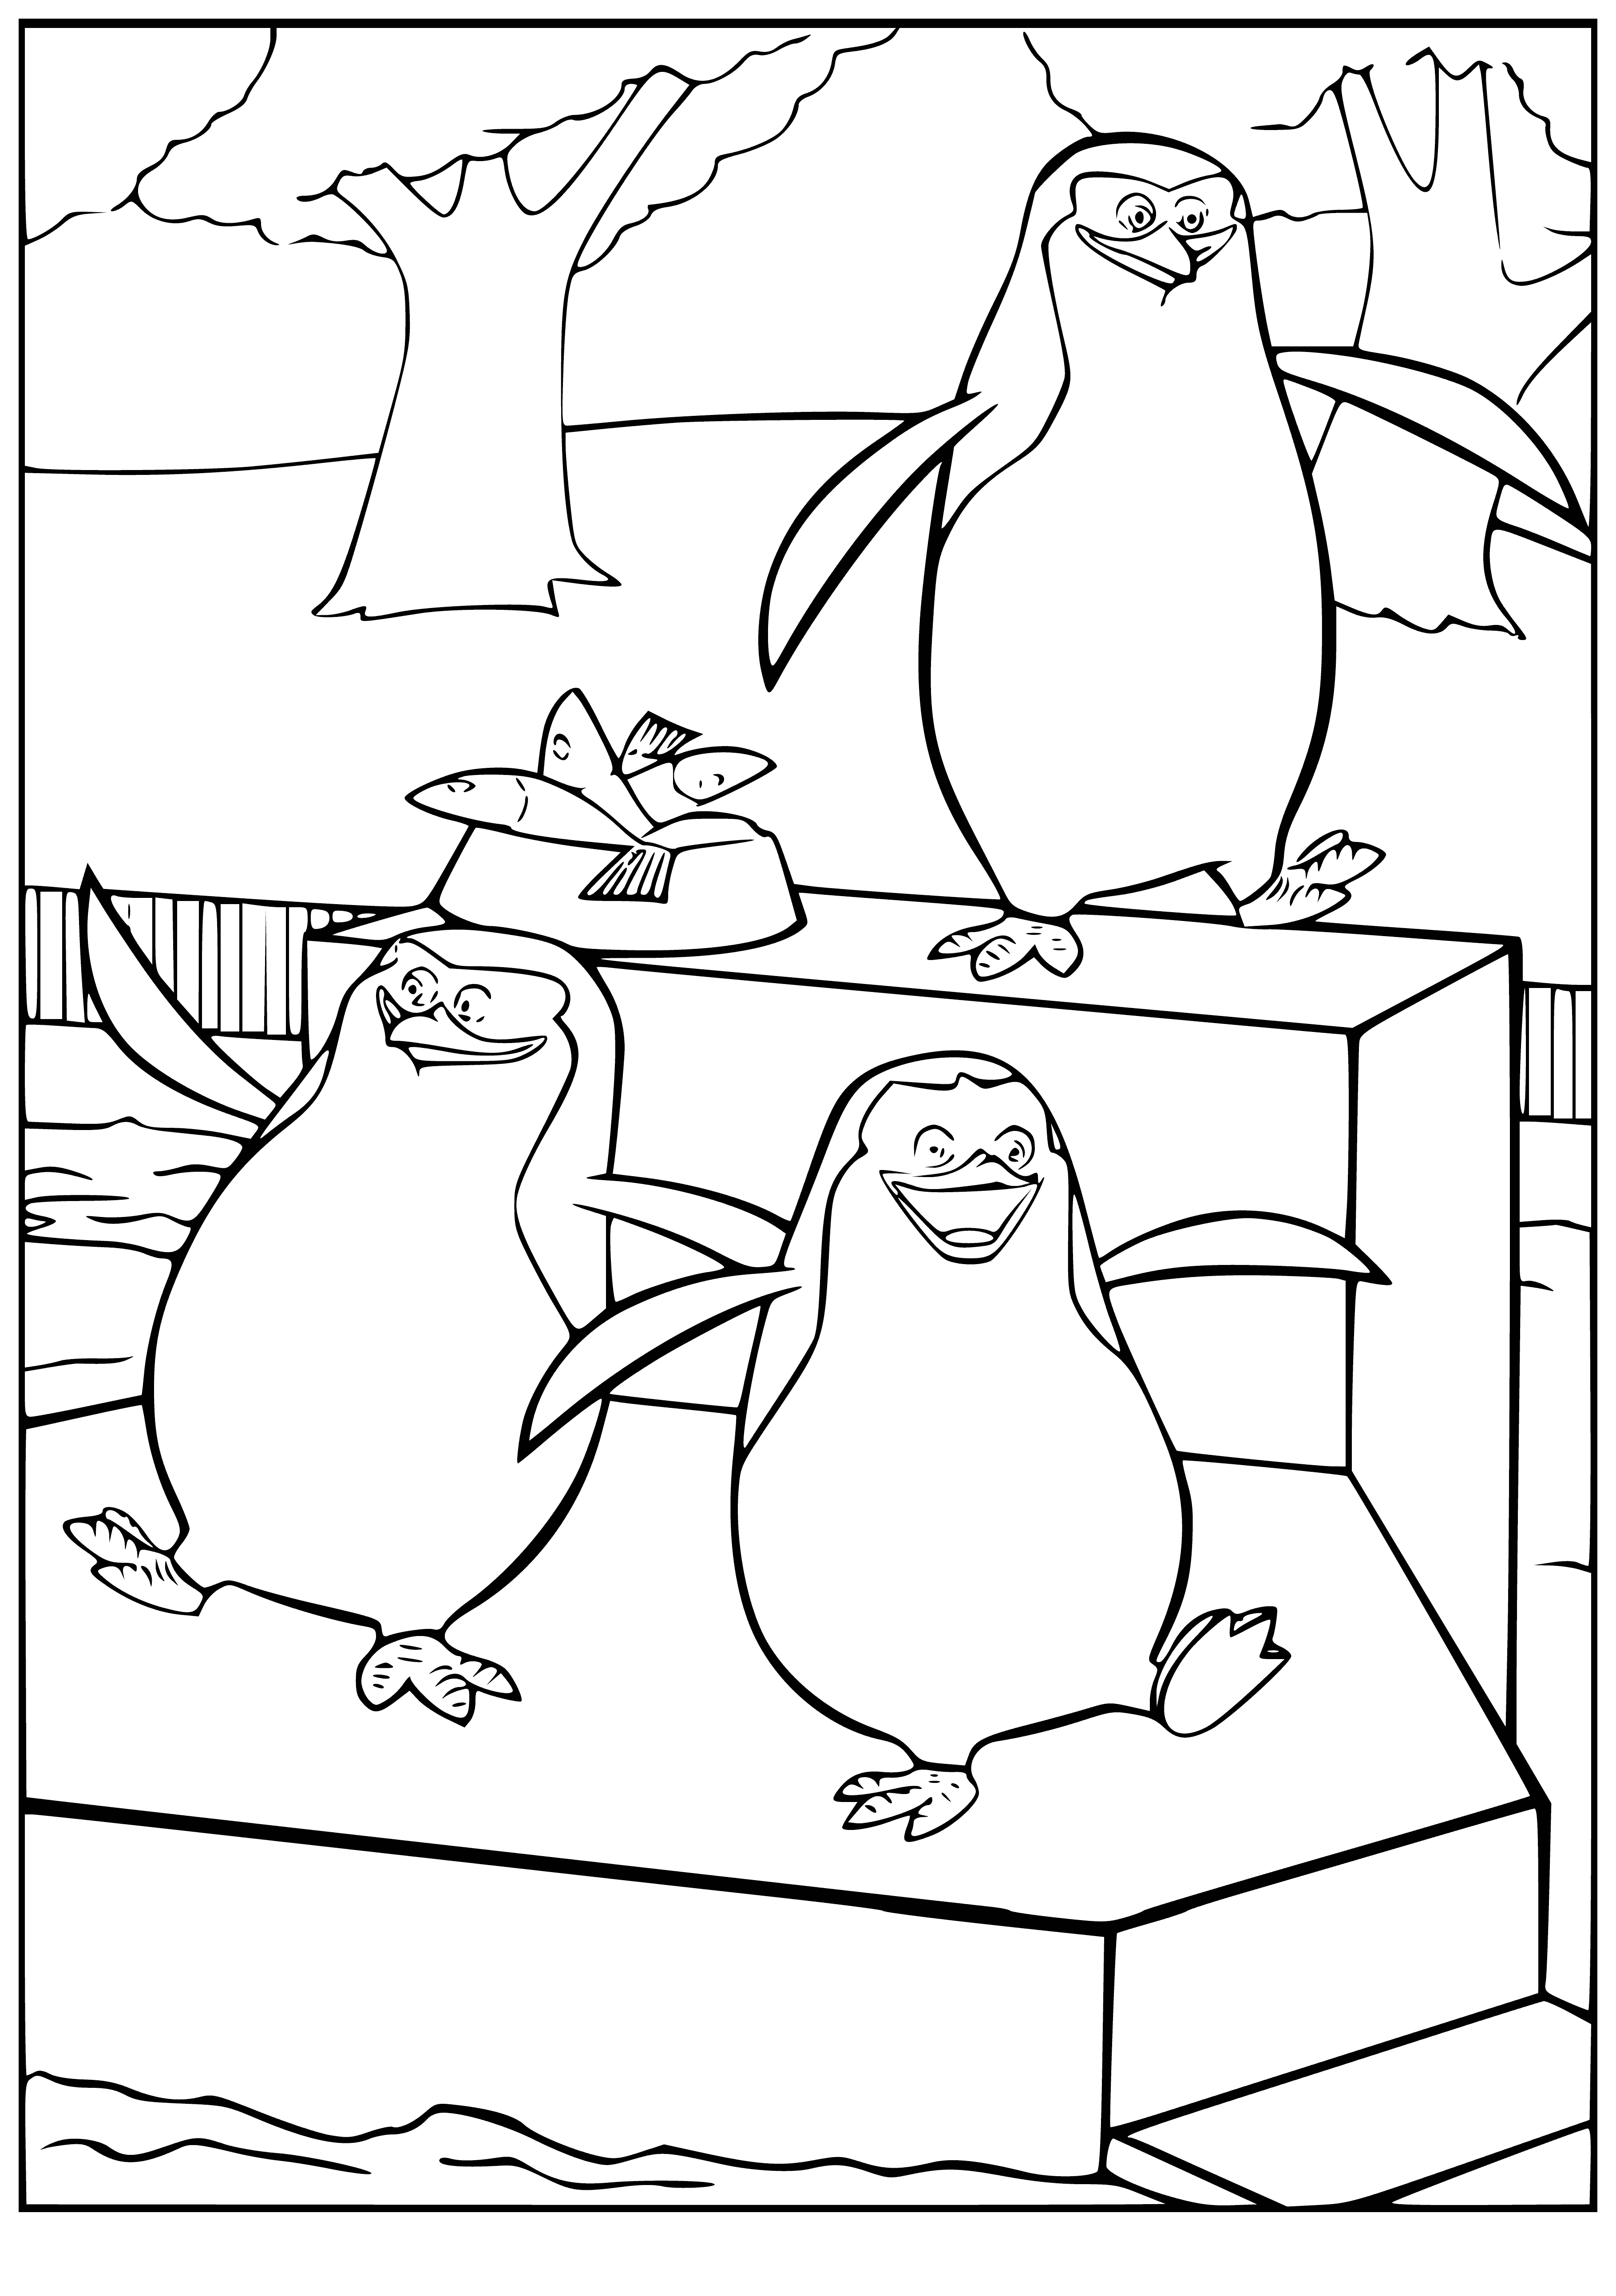 coloring page: Group of penguins on a rock in the water amidst bright blue sky & light blue water, with a small island in the distance. #PenguinParadise